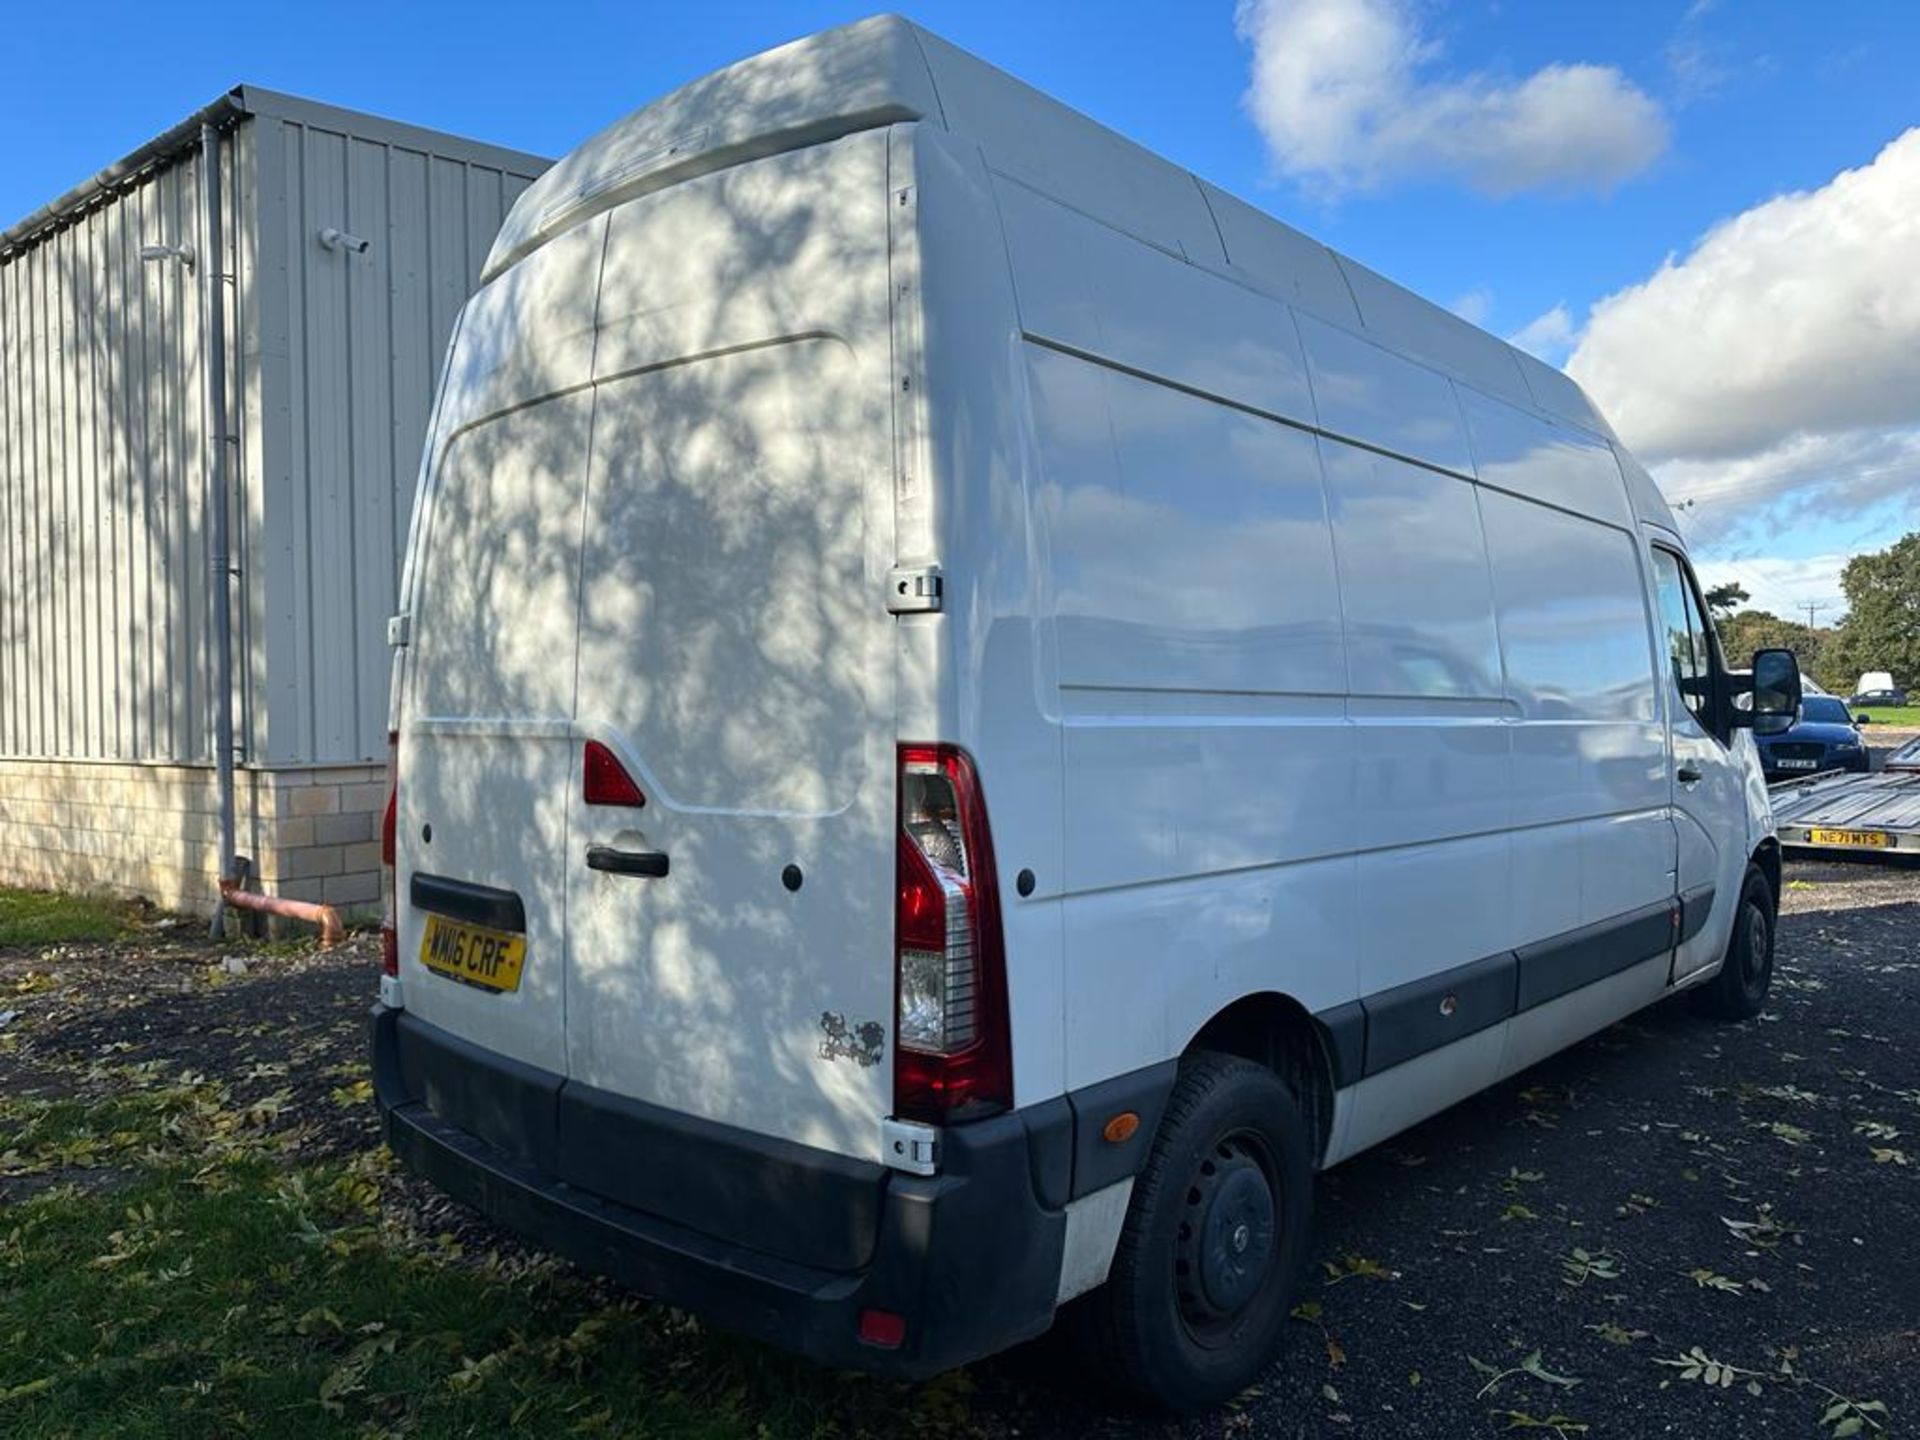 2016 16 VAUXHALL MOVANO PANEL VAN - L3 H3 MODEL - 118K MILES - PLY LINED - Image 4 of 10